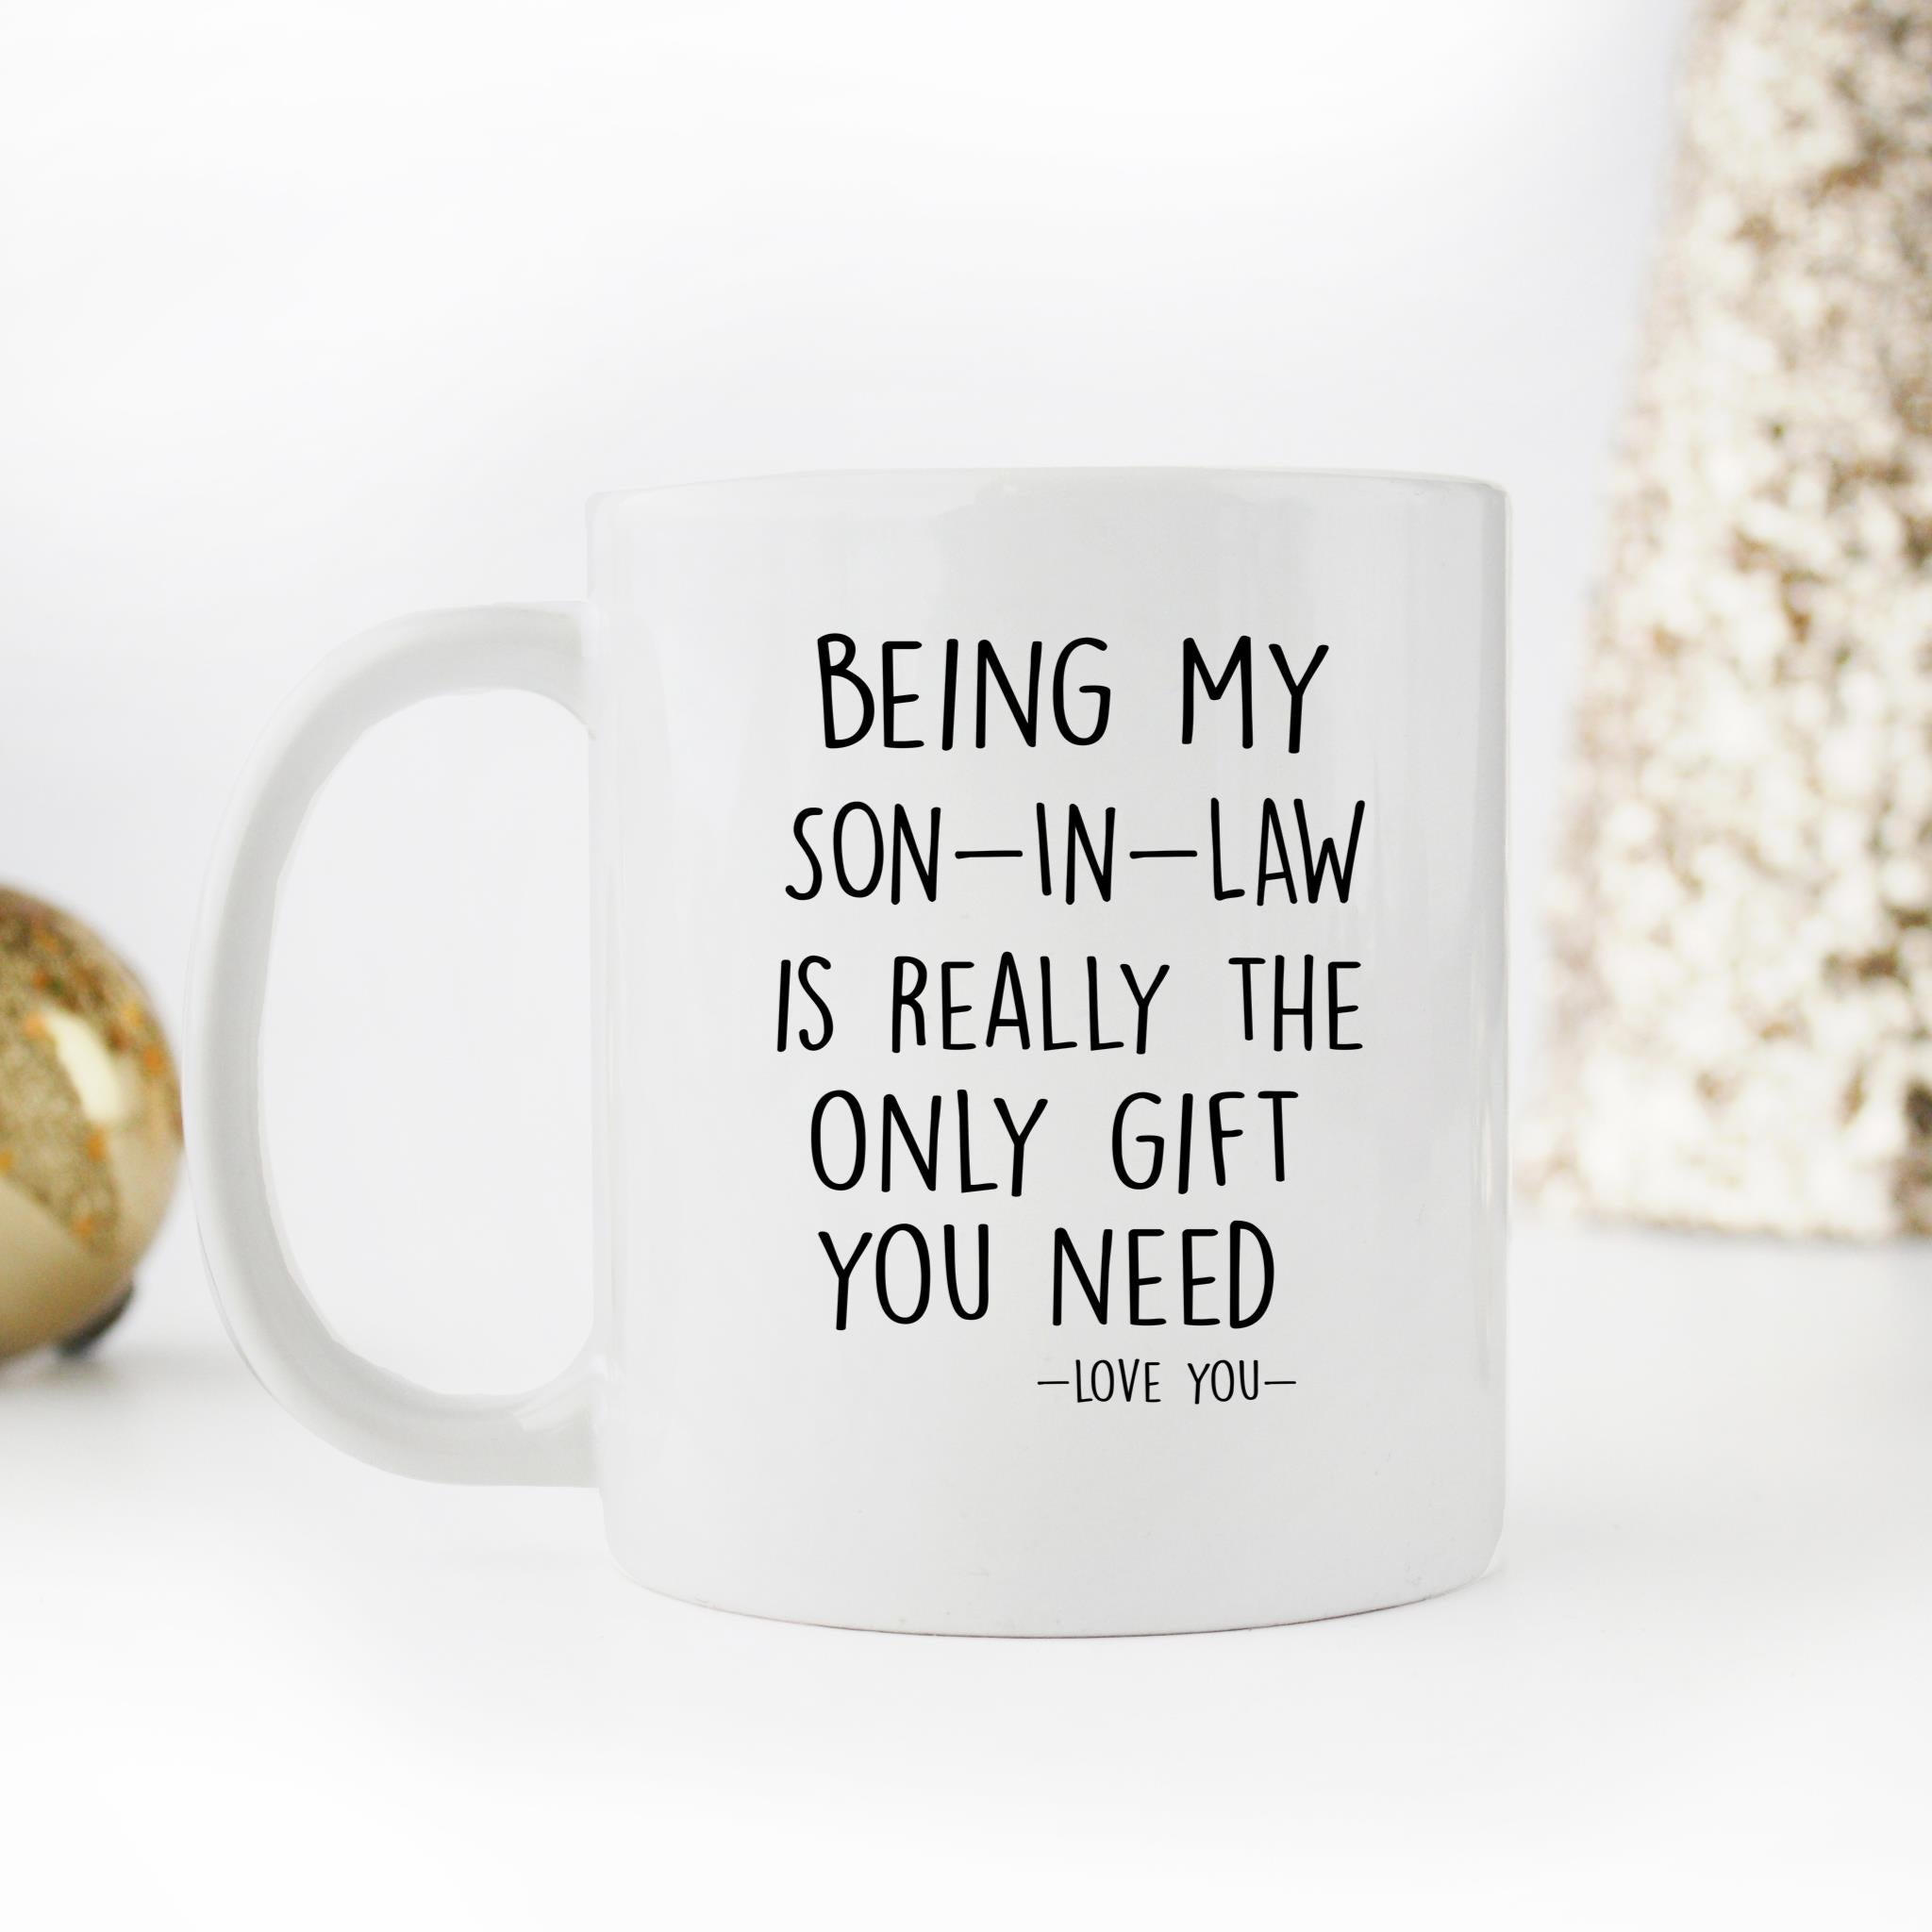 Skitongifts Funny Ceramic Novelty Coffee Mug Being My Son-in-law Is Really The Only You Need  Love You Son-in-law Funny For Father's Day XHadZt0